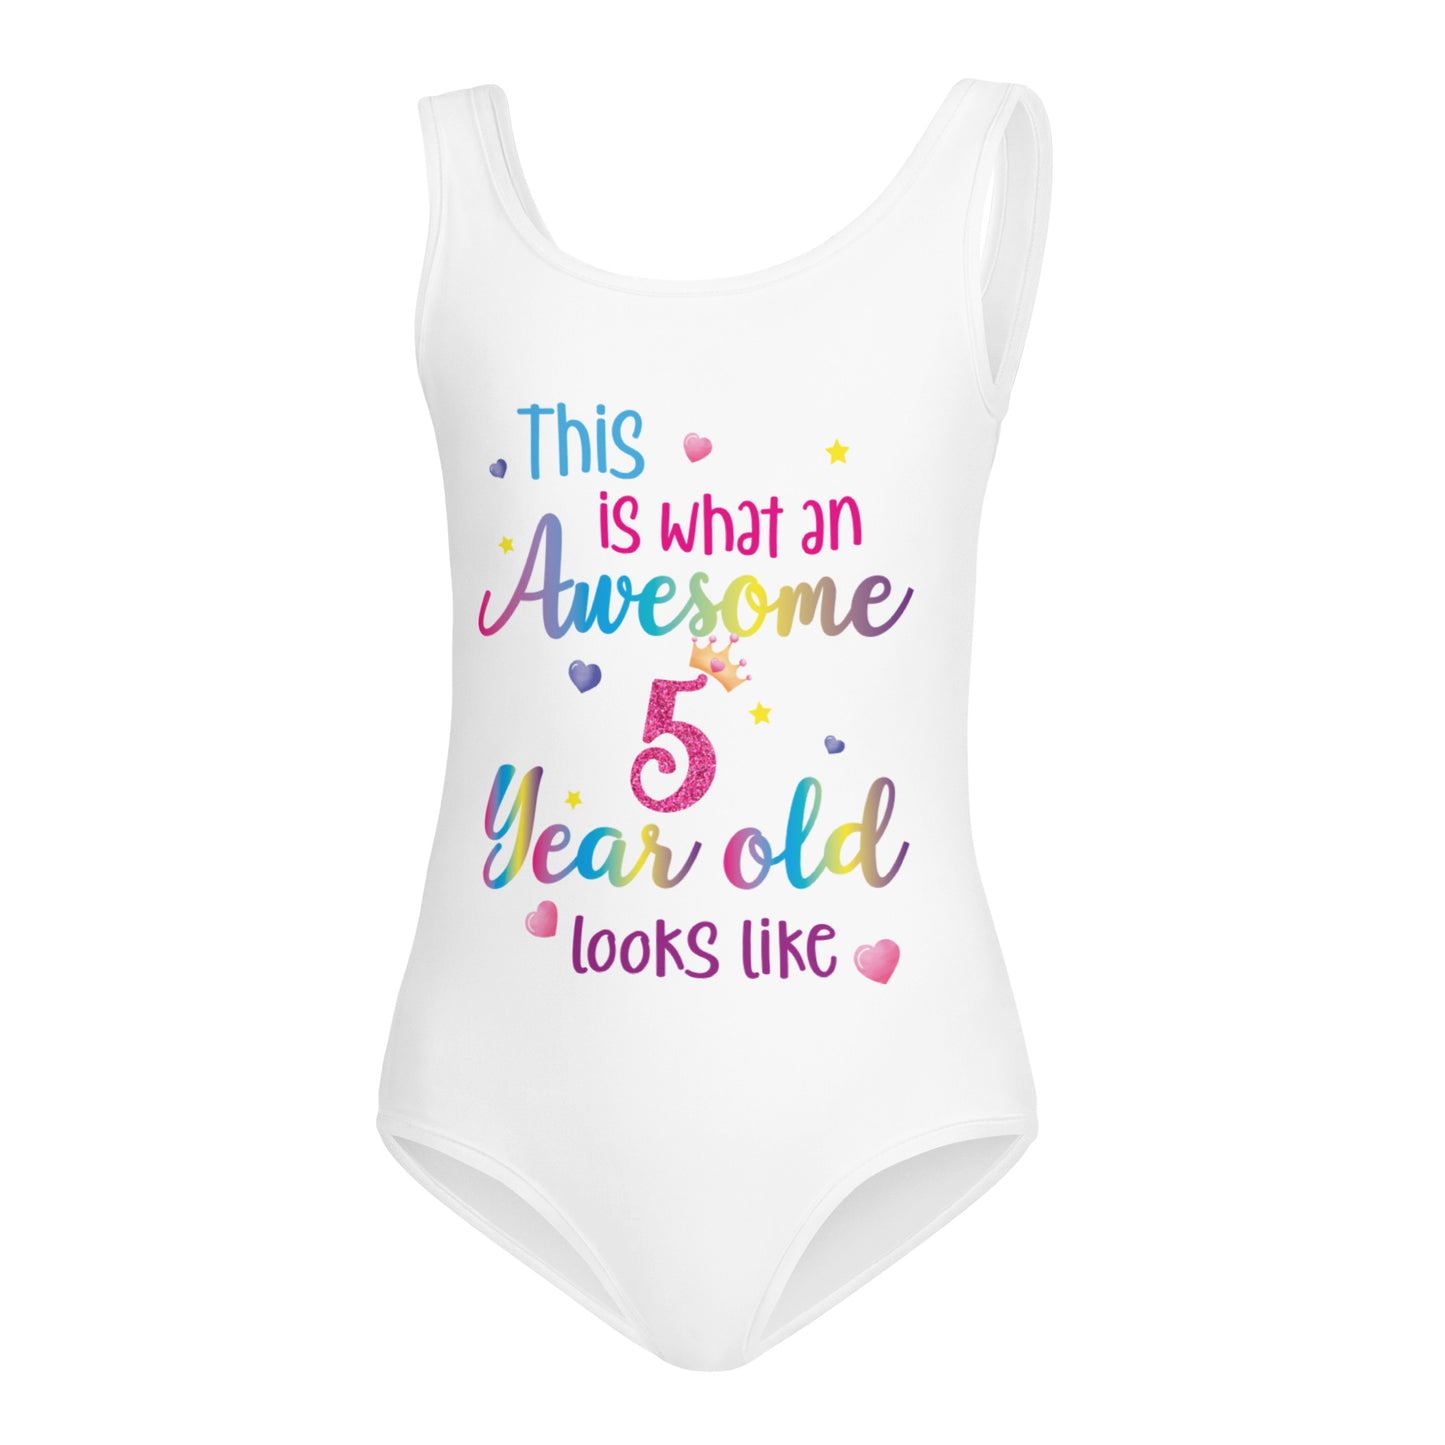 This is What an Awesome 5 Year Old Looks Like Girls Swimsuit, Birthday 5th Five Year Fun Rainbow Party Gift Kids One Piece Bathing Suit Swimwear Starcove Fashion